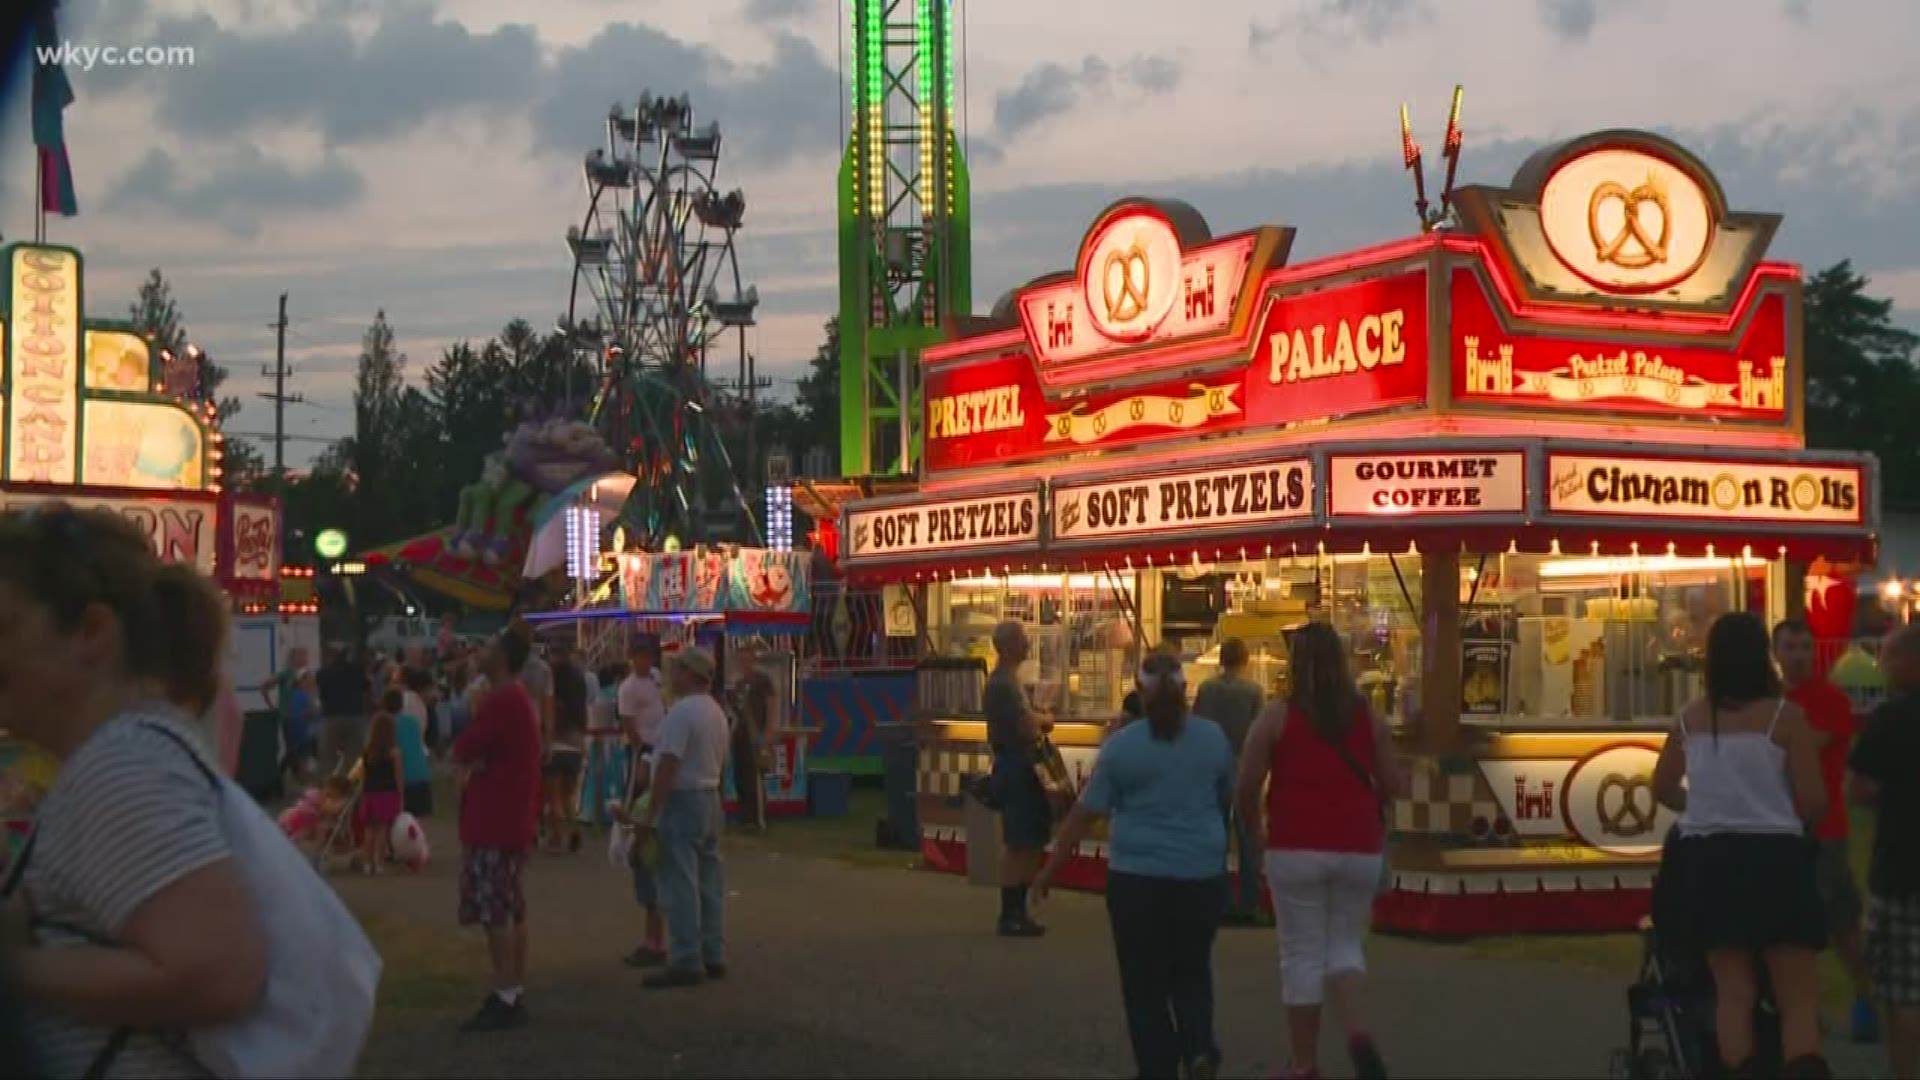 Stark County Fair What to expect in 2019